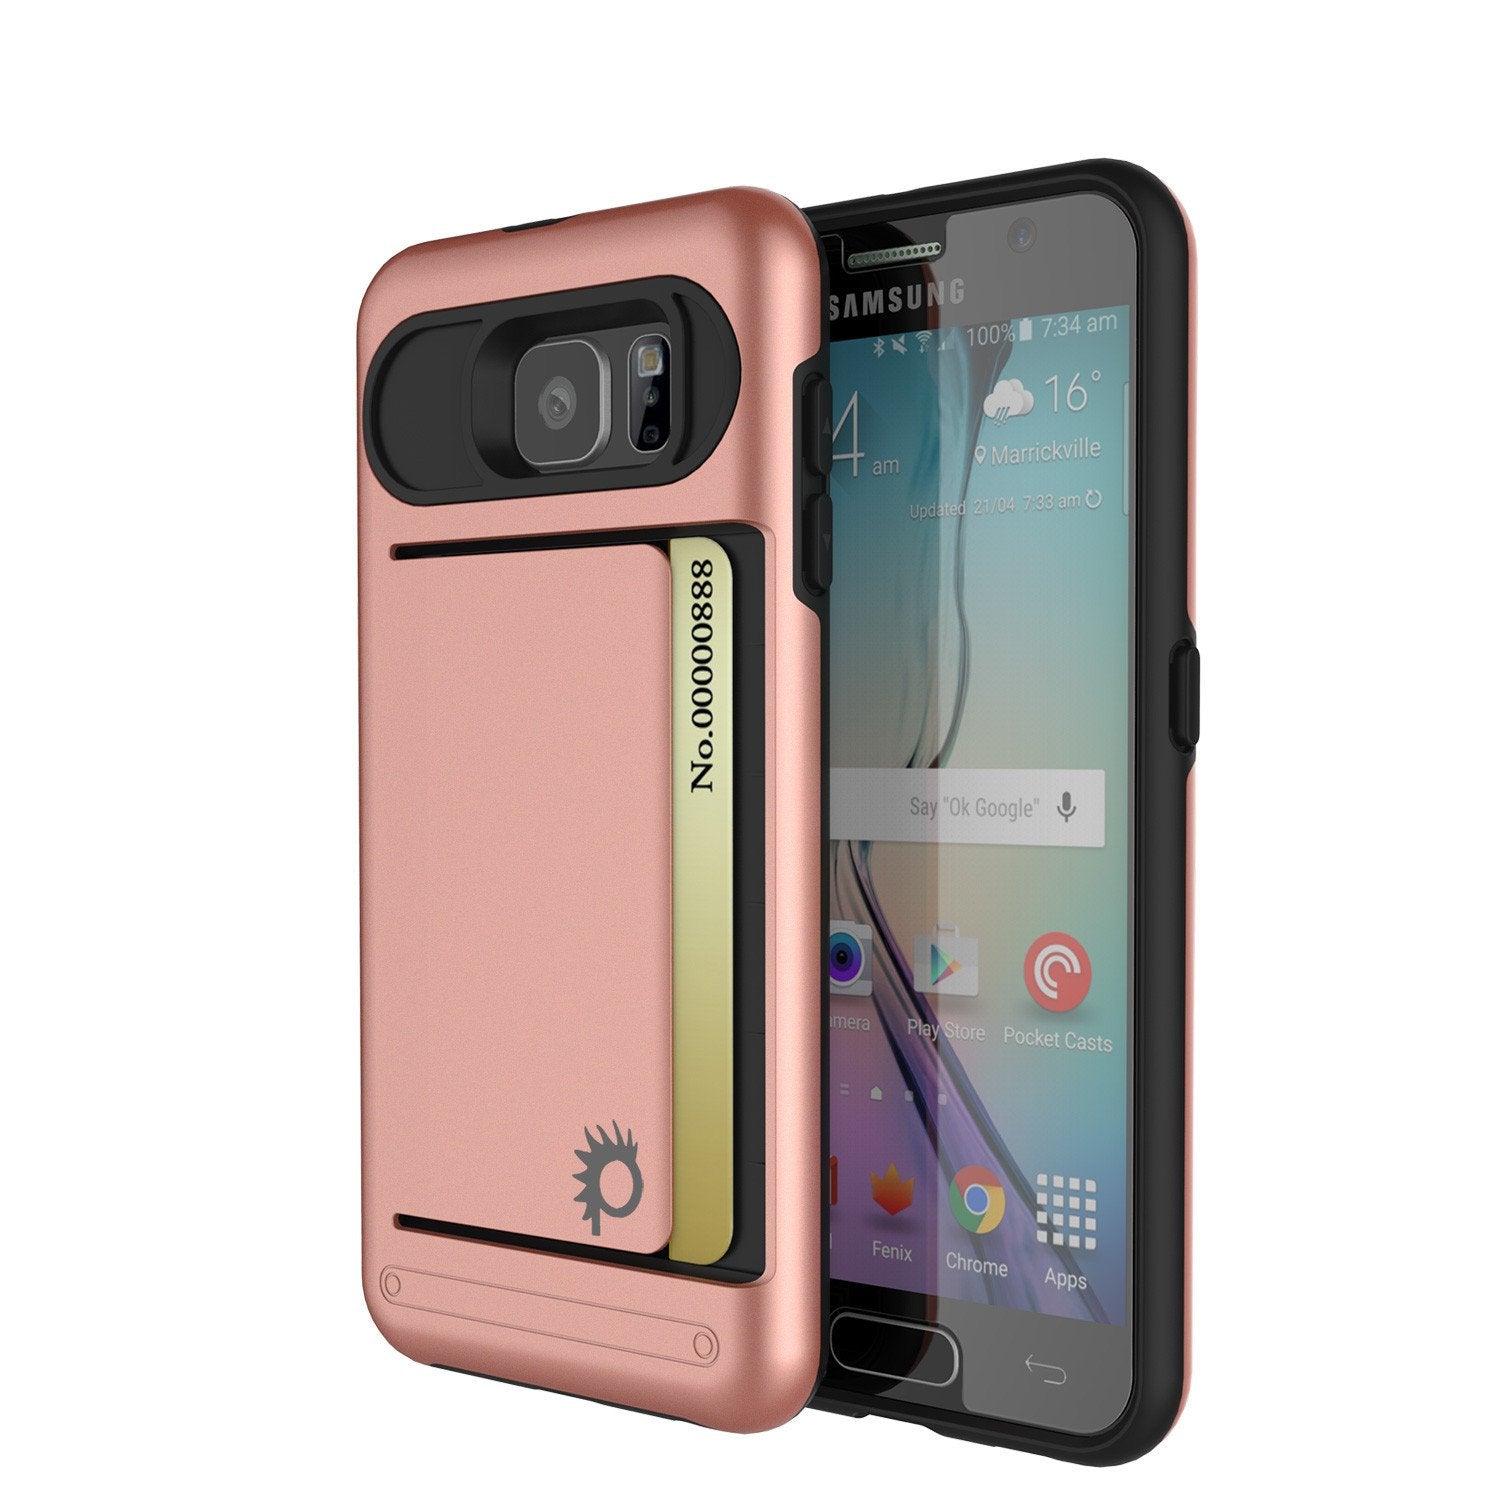 Galaxy S6 EDGE Case PunkCase CLUTCH Rose Gold Series Slim Armor Soft Cover Case w/ Screen Protector - PunkCase NZ